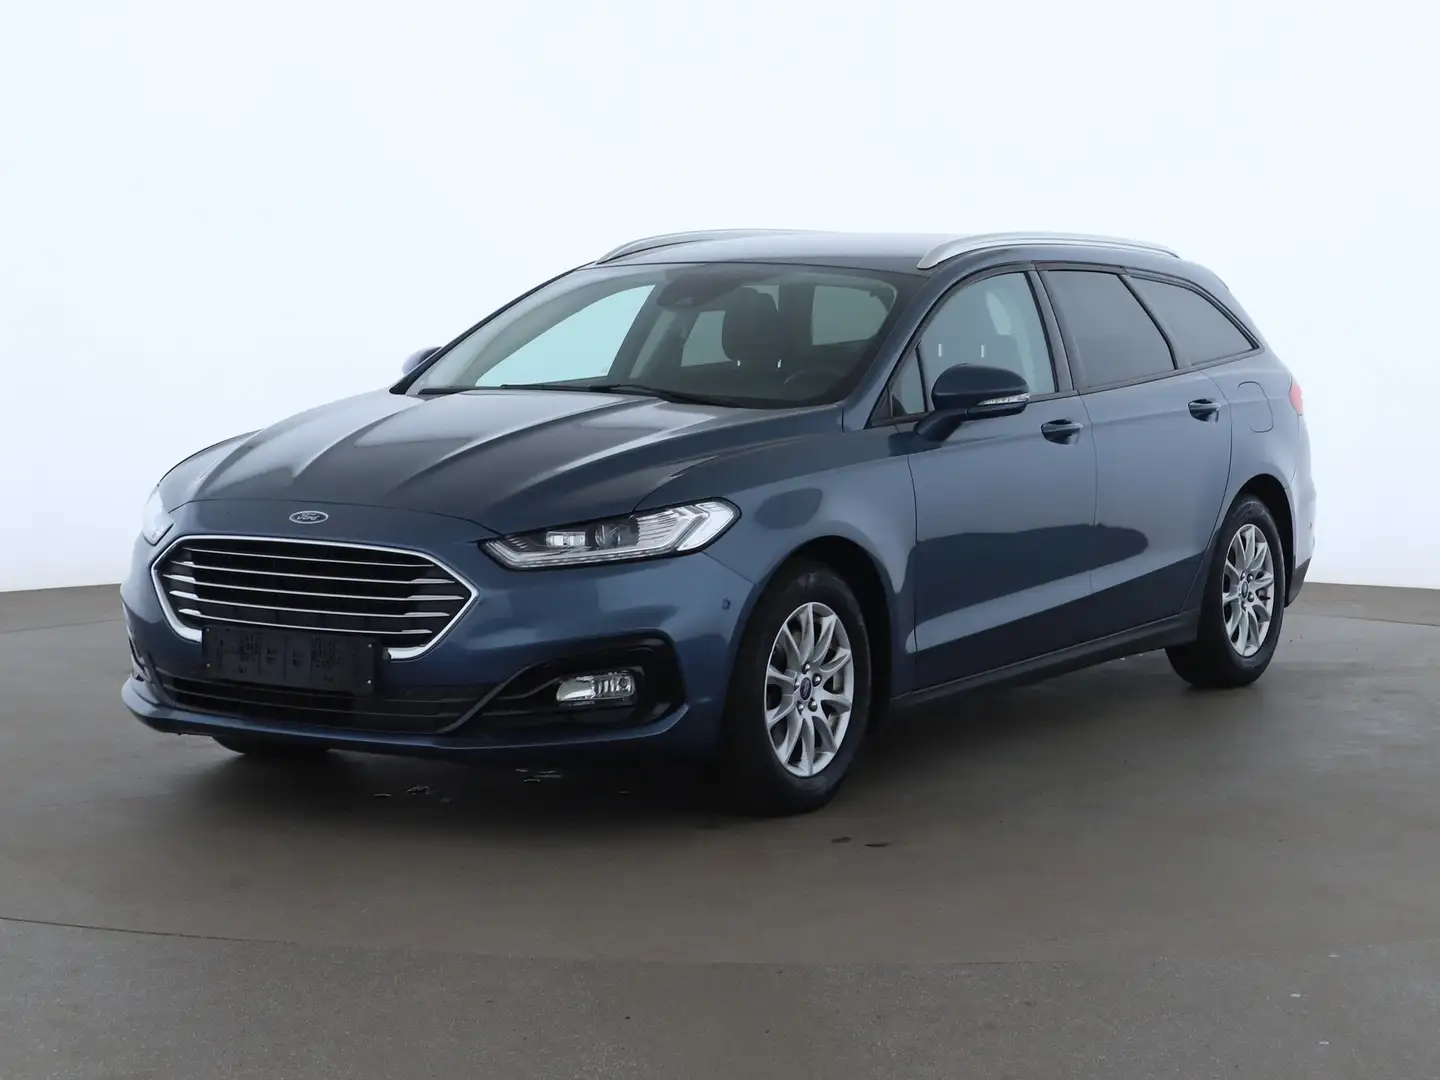 Ford Mondeo Turnier 1.5 Trend Business Edition STANDH. LED. Modrá - 1